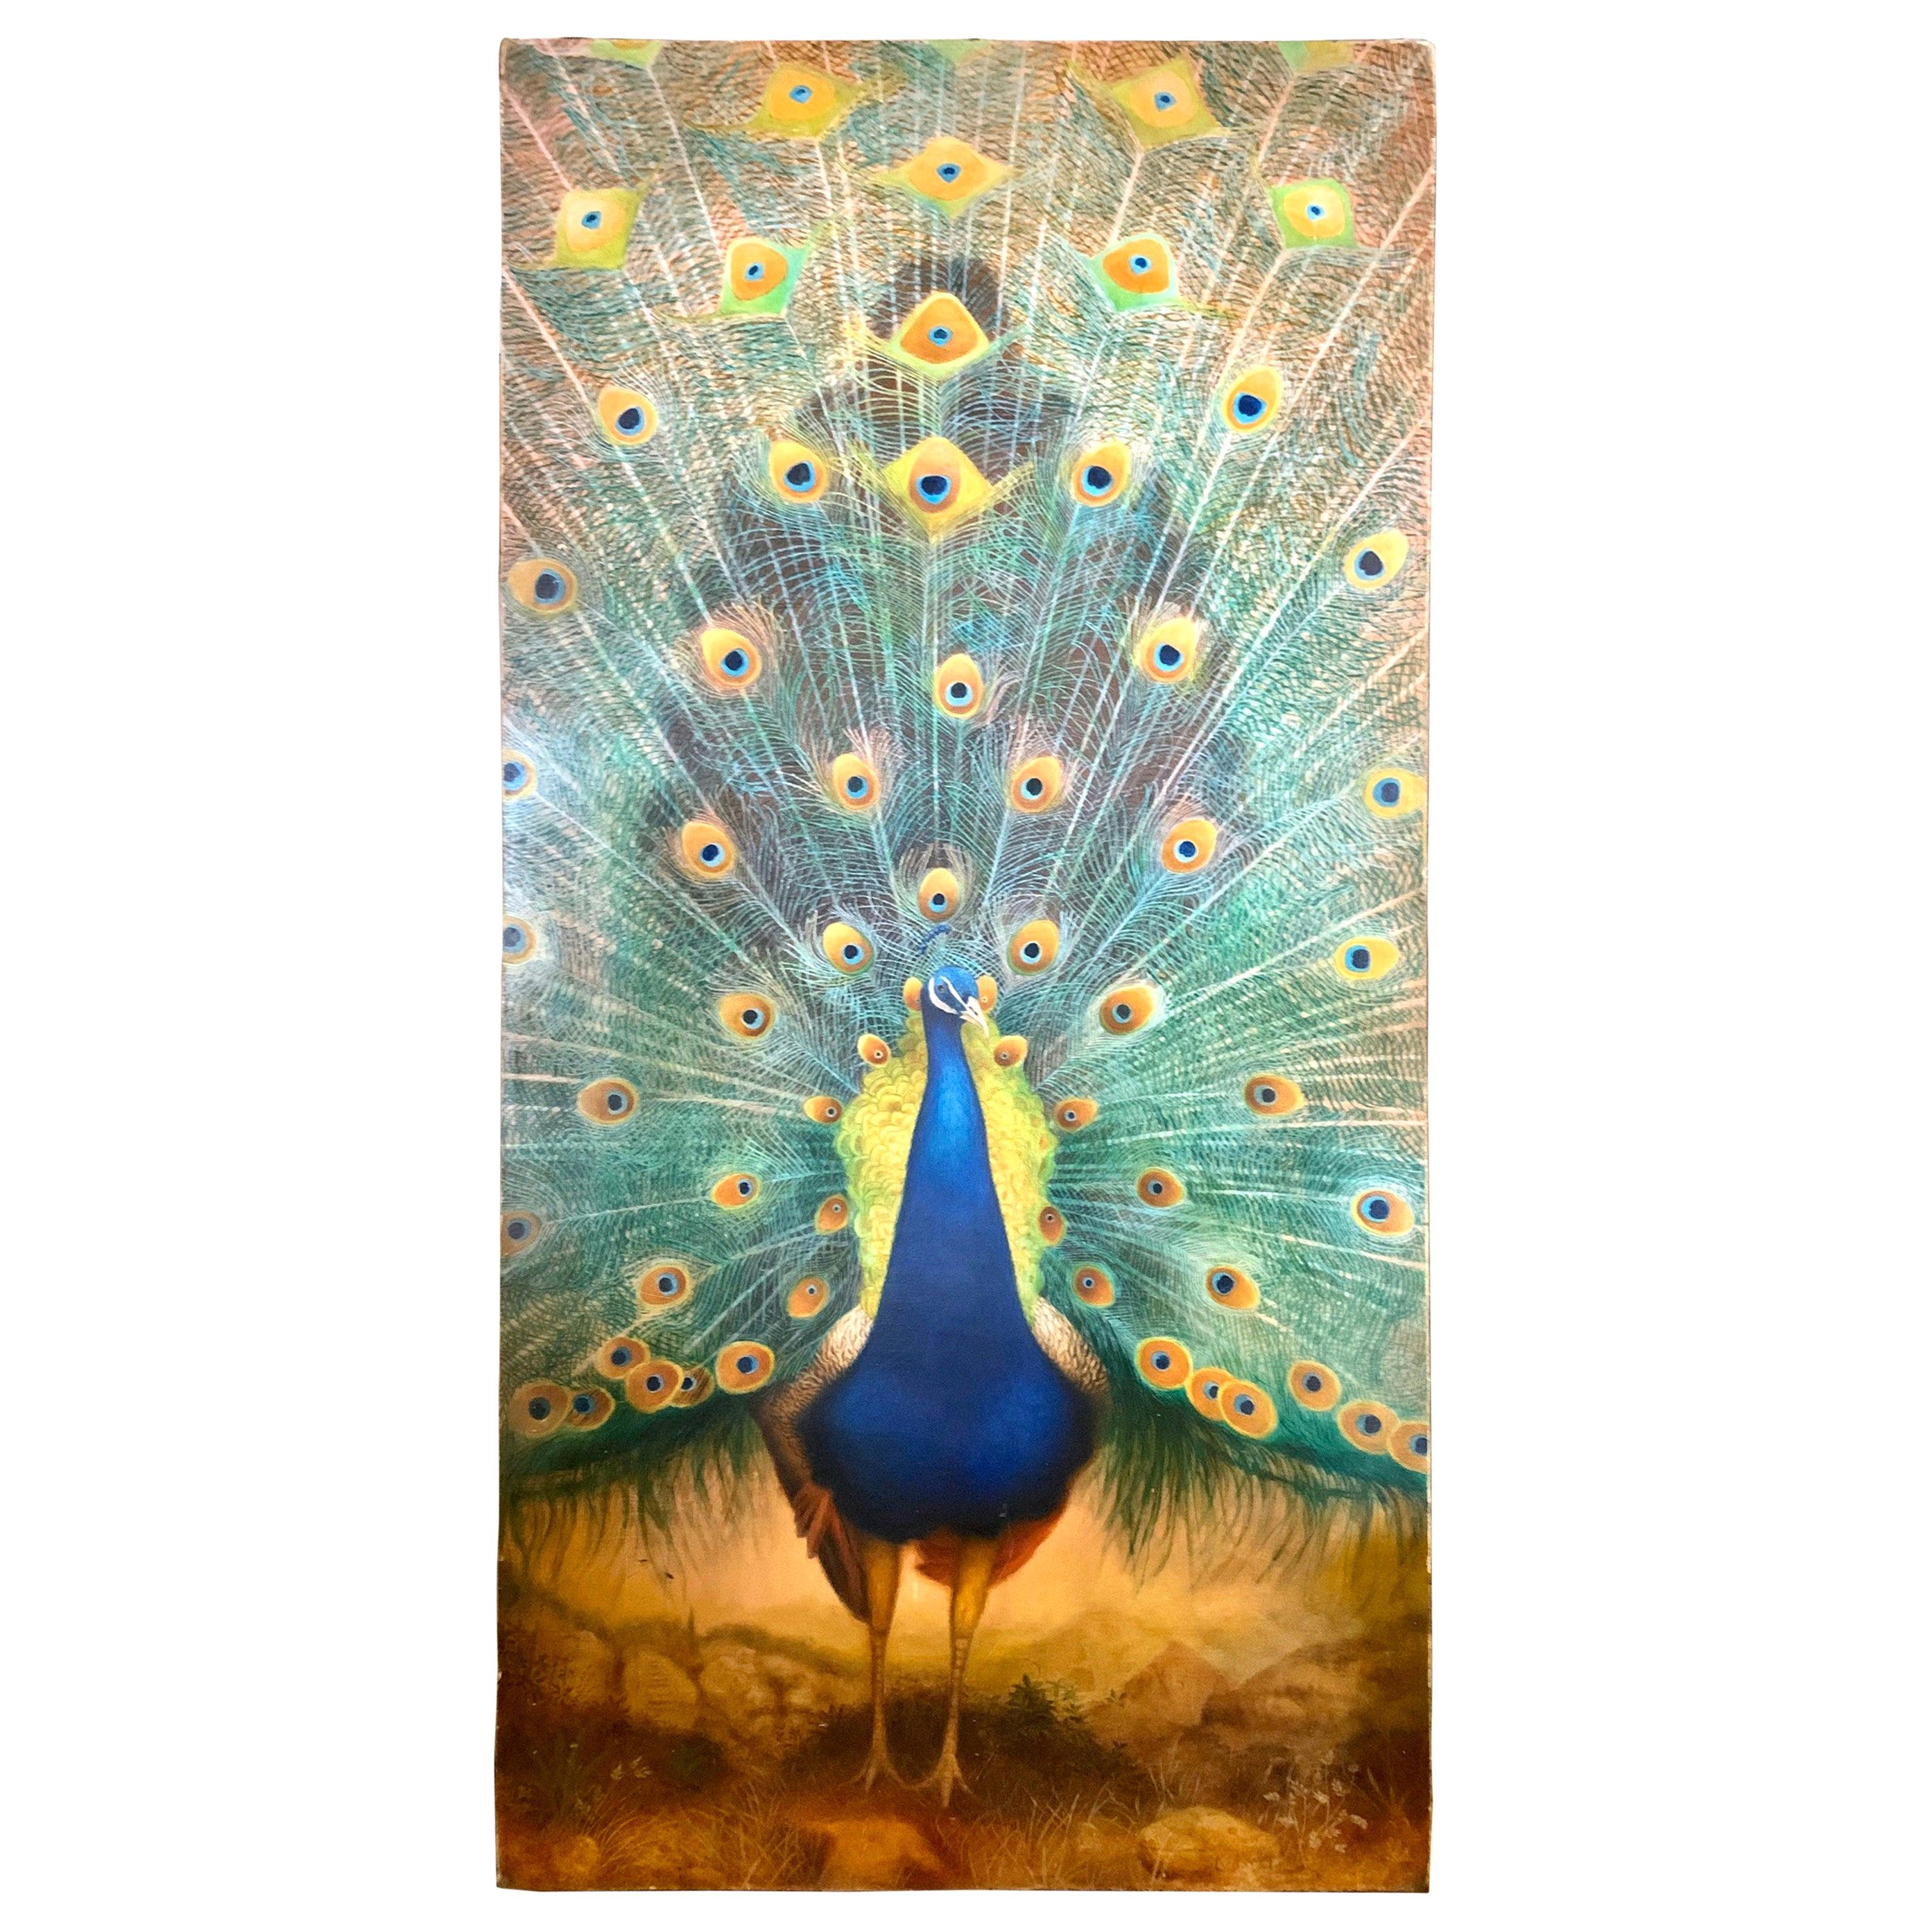 Tall 8 Ft. Original Peacock Painting Signed